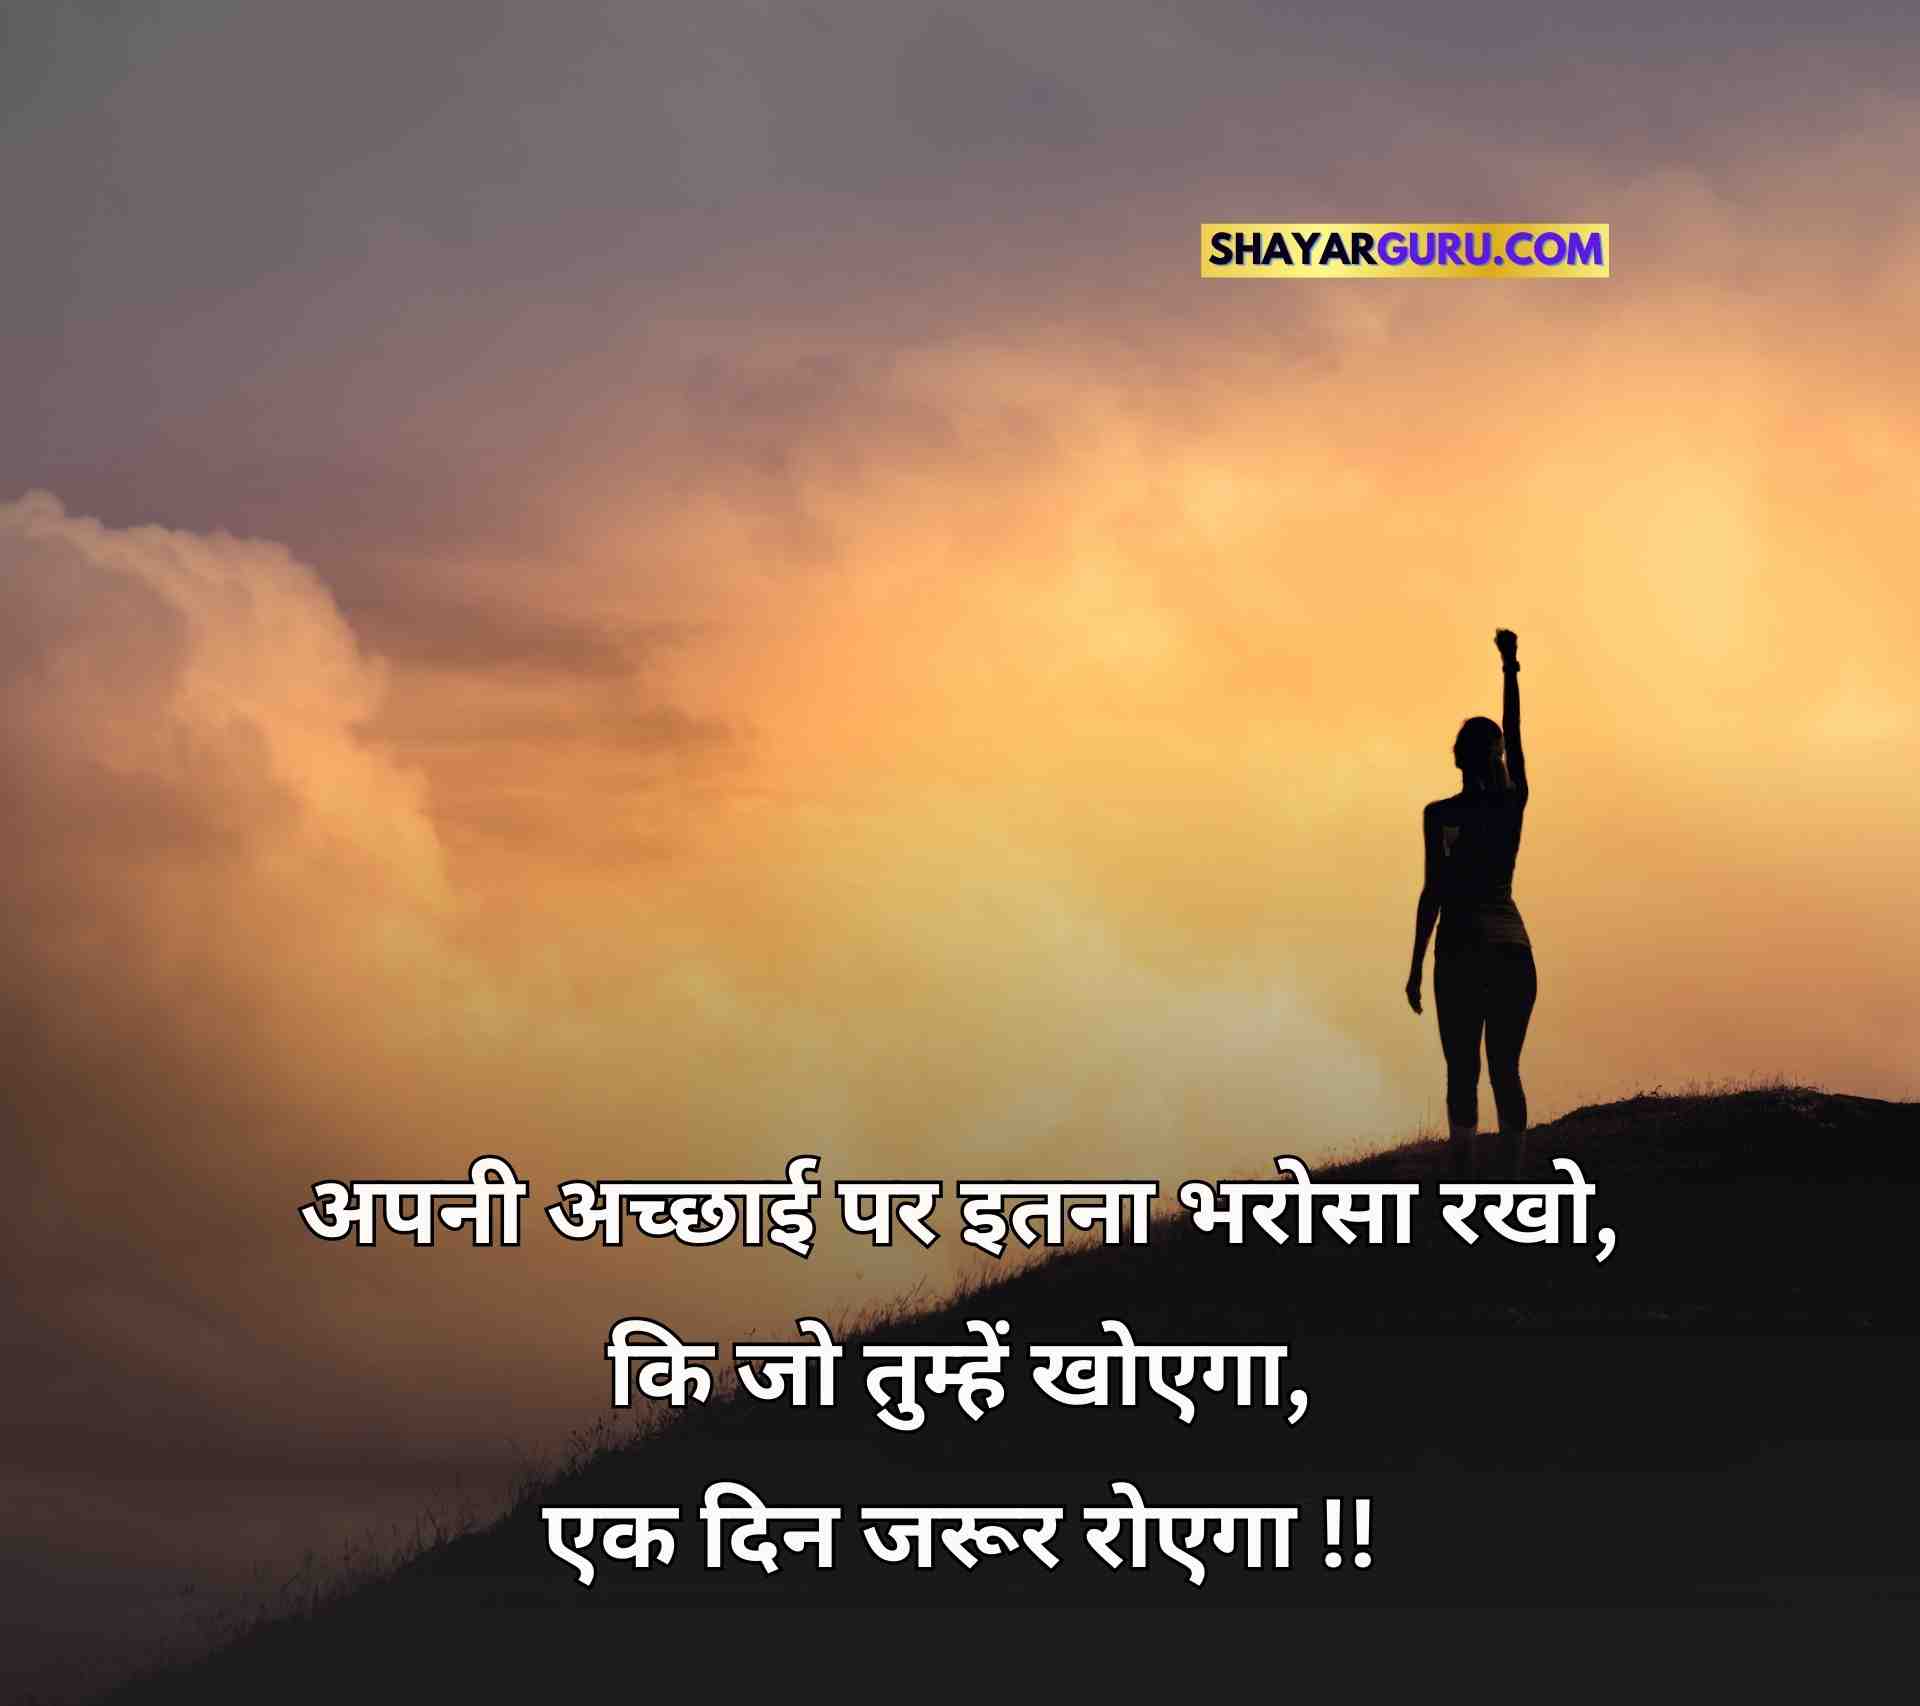 Self Confidence Quotes in Hindi